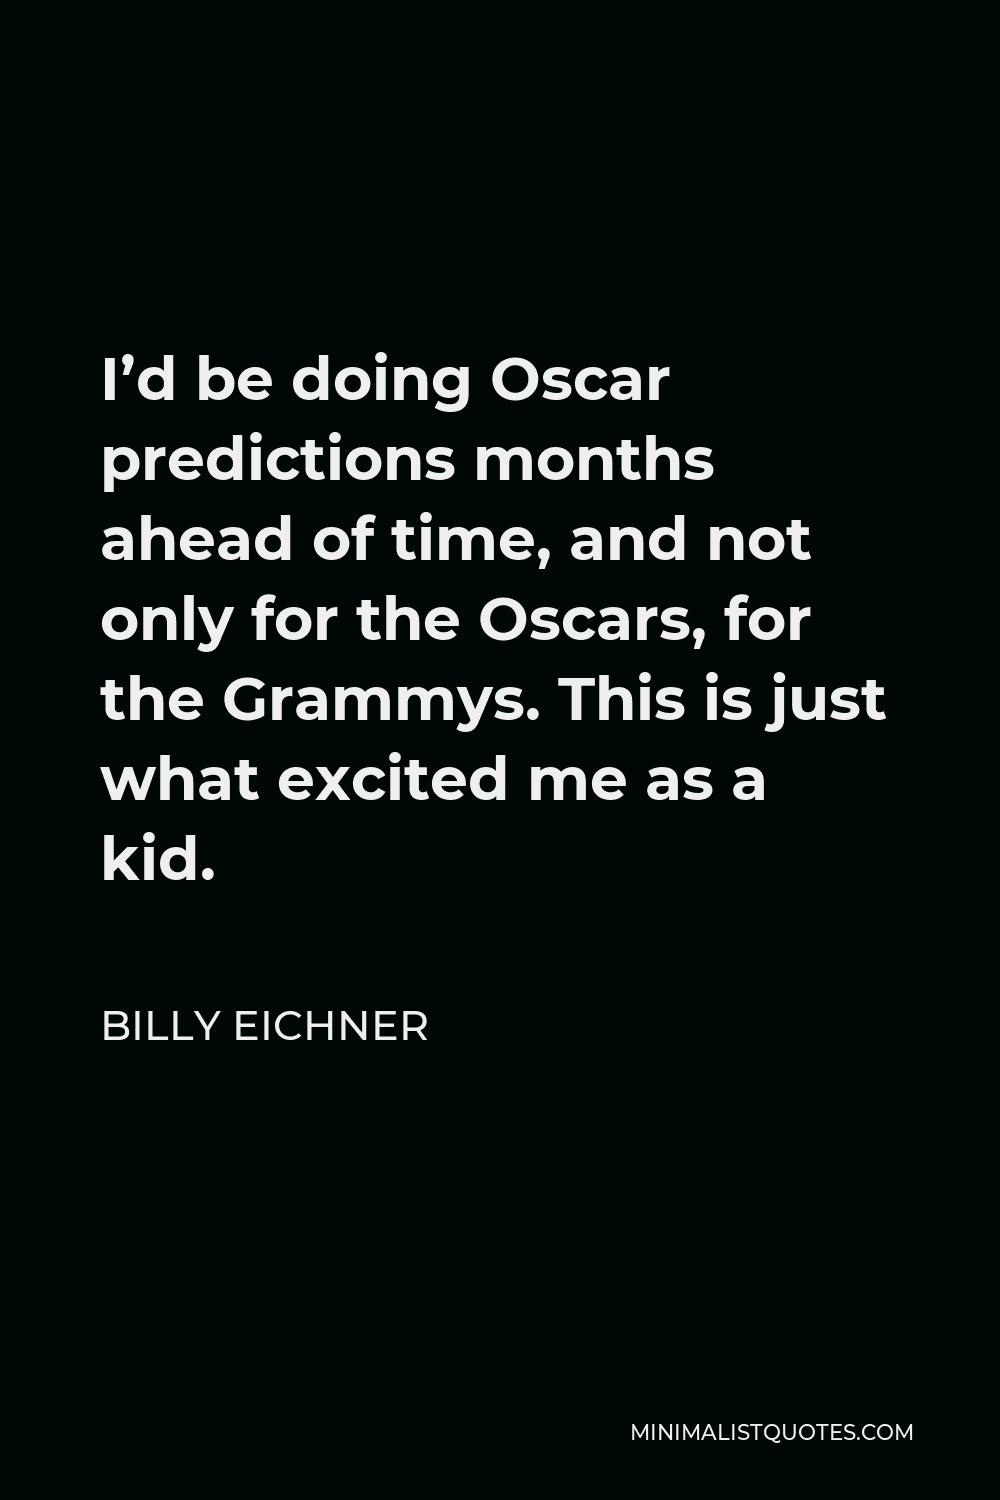 Billy Eichner Quote - I’d be doing Oscar predictions months ahead of time, and not only for the Oscars, for the Grammys. This is just what excited me as a kid.